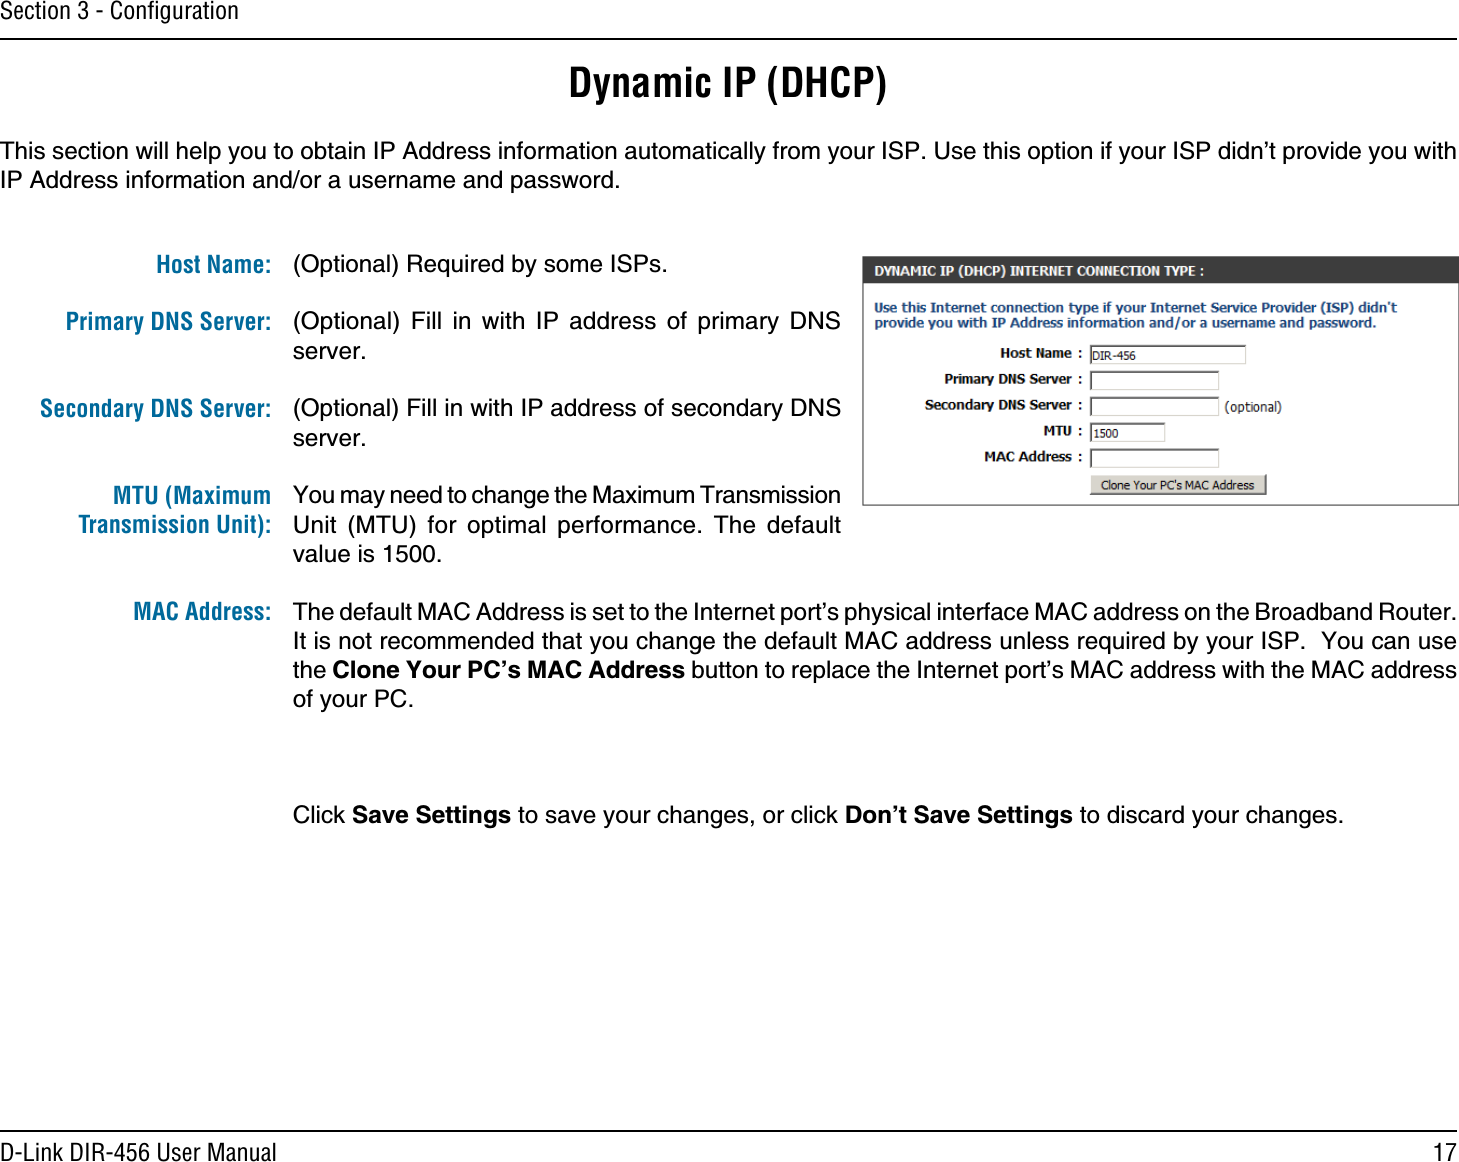 17D-Link DIR-456 User ManualSection 3 - ConﬁgurationDynamic IP (DHCP)(Optional) Required by some ISPs.(Optional) Fill in with IP address of primary DNS server.(Optional) Fill in with IP address of secondary DNS server.You may need to change the Maximum Transmission Unit (MTU) for optimal performance. The default value is 1500.The default MAC Address is set to the Internet port’s physical interface MAC address on the Broadband Router. It is not recommended that you change the default MAC address unless required by your ISP.  You can use the Clone Your PC’s MAC Address button to replace the Internet port’s MAC address with the MAC address of your PC.Click Save Settings to save your changes, or click Don’t Save Settings to discard your changes.This section will help you to obtain IP Address information automatically from your ISP. Use this option if your ISP didn’t provide you with IP Address information and/or a username and password.Host Name:Primary DNS Server: Secondary DNS Server: MTU (Maximum Transmission Unit): MAC Address: 